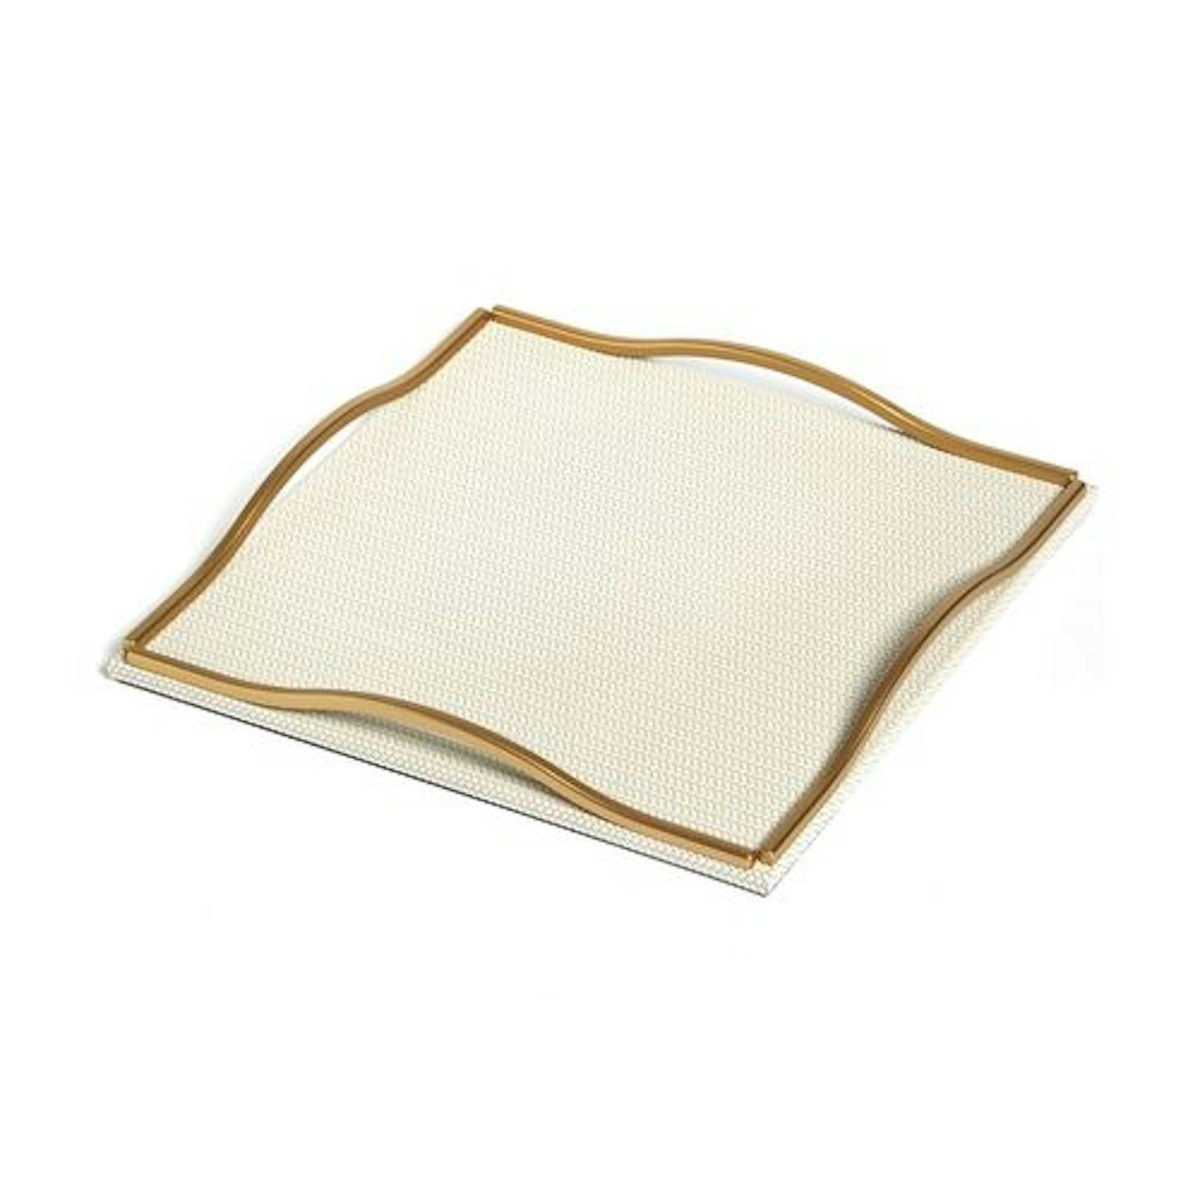 Square Wave Tray - 21 Best Decorative Trays To Buy For Your Tabletop - LuxDeco.com